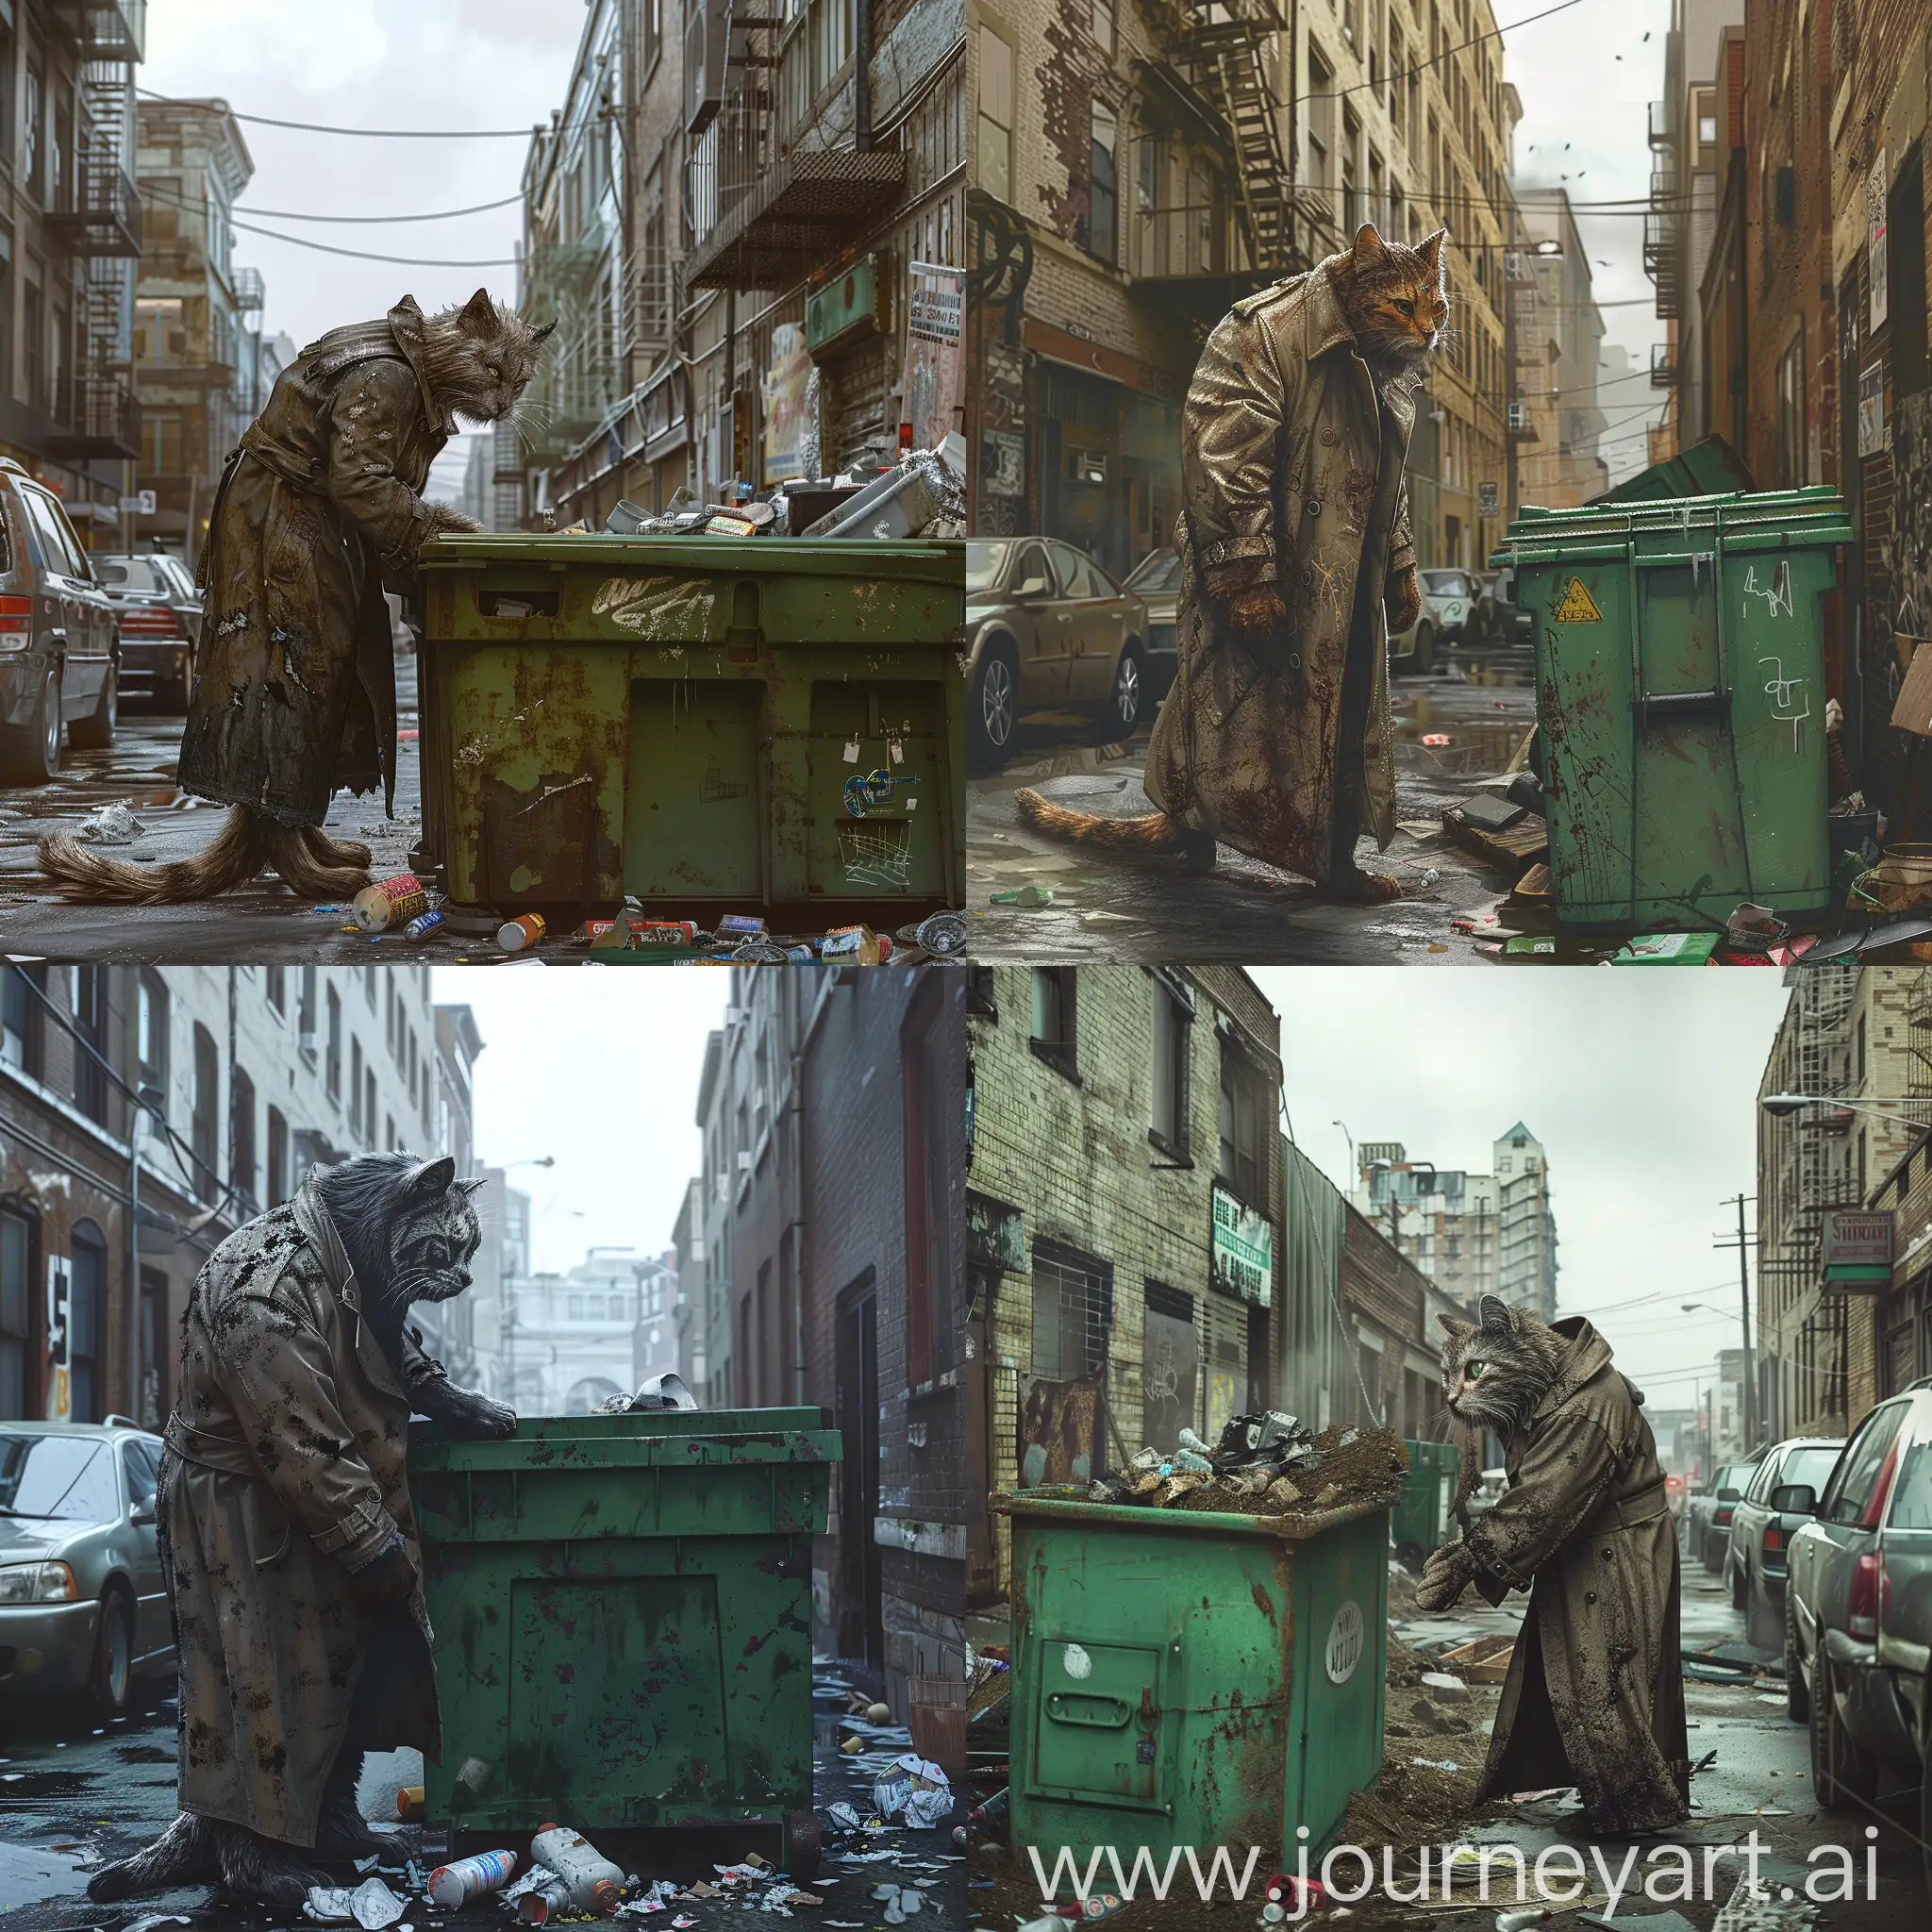 a photorealistic scene depicting a large anthropomorphic cat wearing a worn and dirty trench coat while rummaging through a green dumpster in an urban alleyway. The backdrop should include old, weathered buildings with some peeling paint, parked cars along the street, and scattered garbage on the ground. The overall atmosphere should feel gritty, with a cold, overcast sky providing a sense of melancholy. The cat character should have detailed fur with patches of dirt and a focused expression while searching through the trash, blending seamlessly into the urban environment